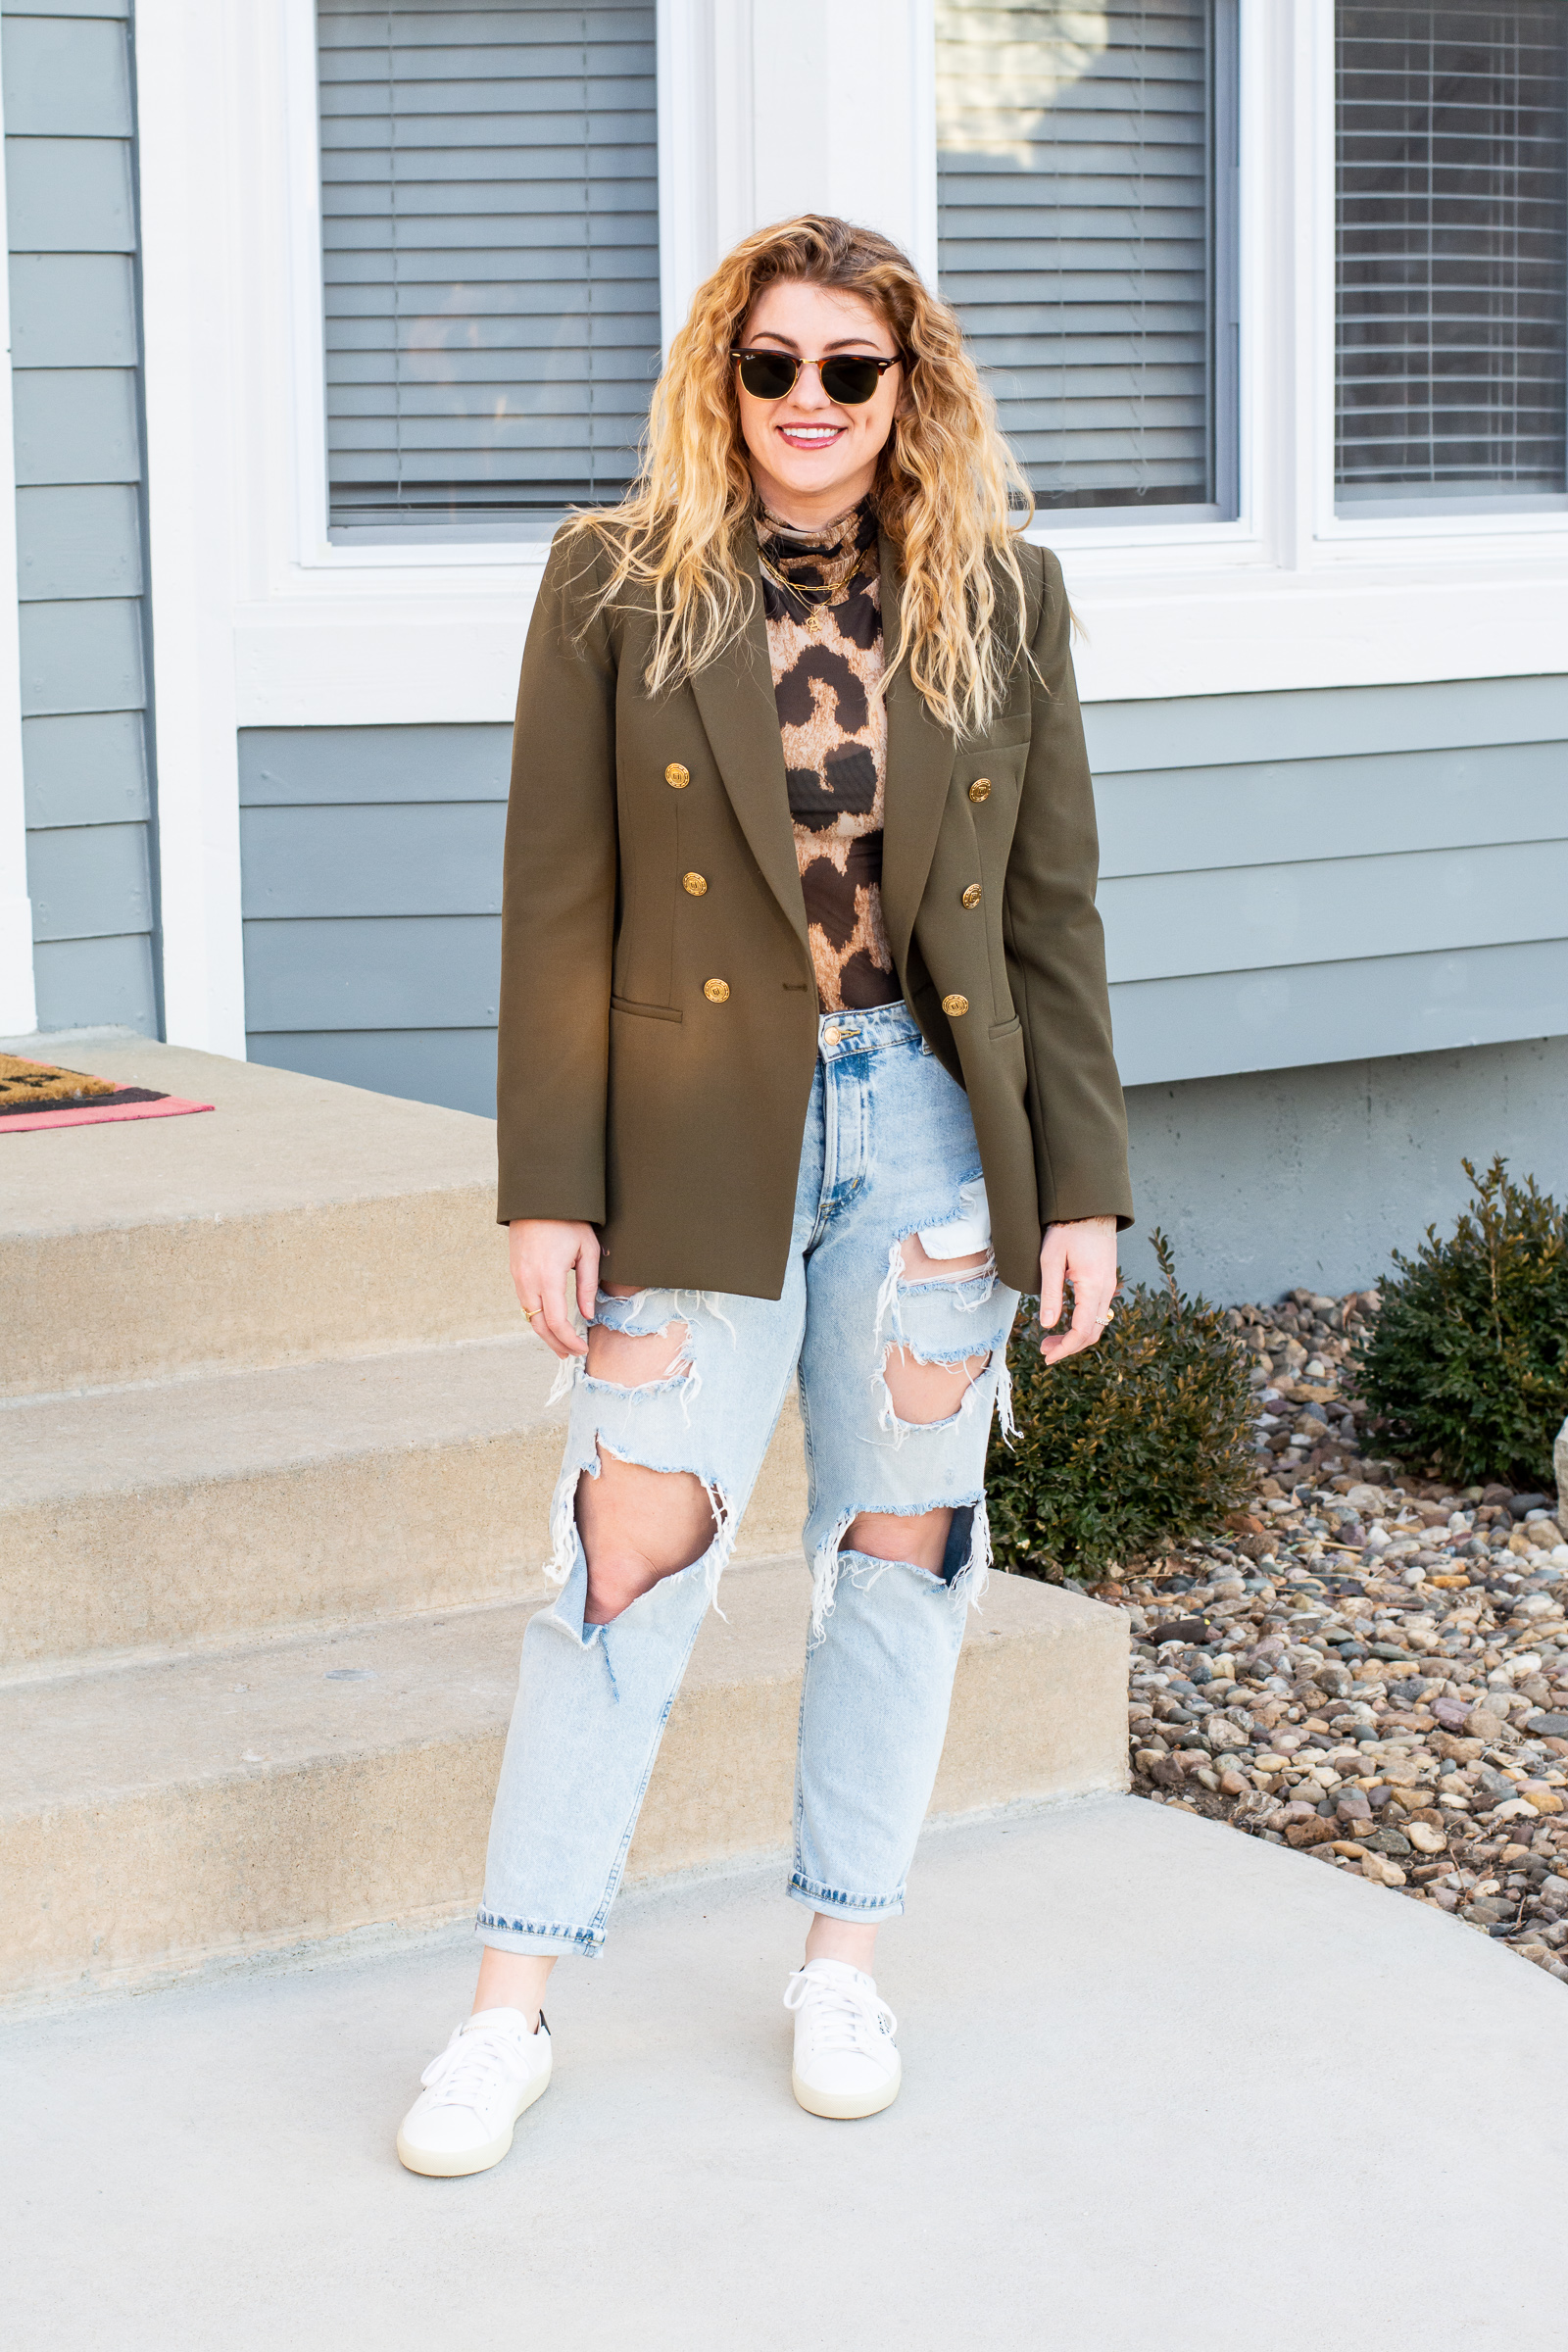 Olive Green Blazer + Ripped Jeans. | LSR